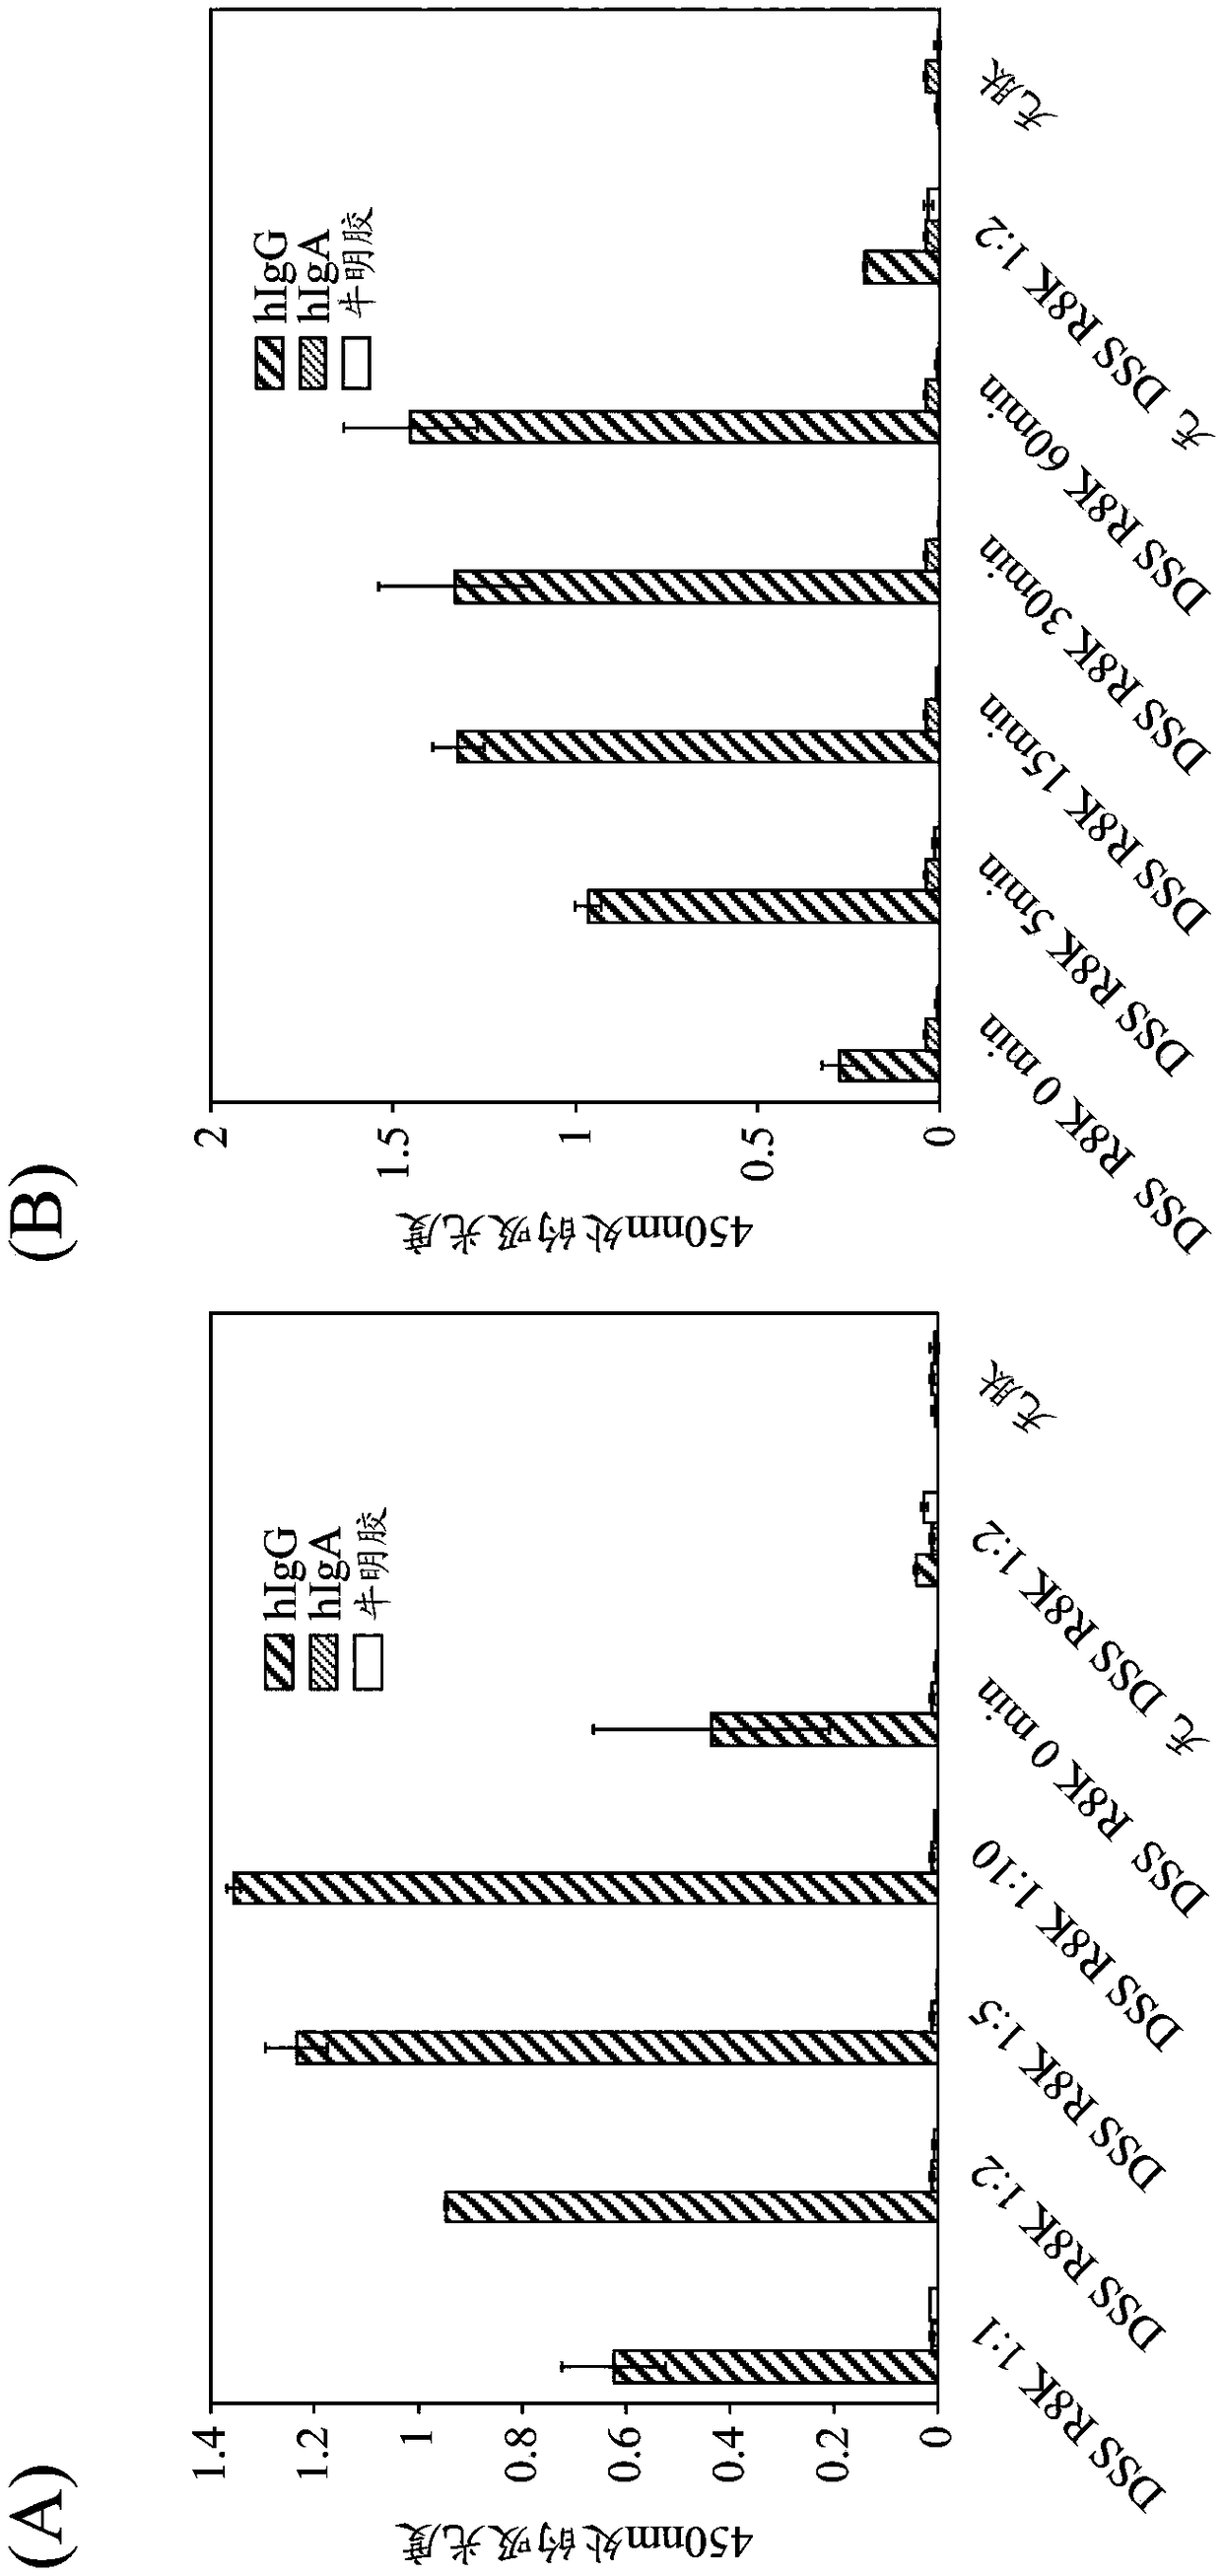 Site-specific radioisotope-labeled antibody using IgG-binding peptide